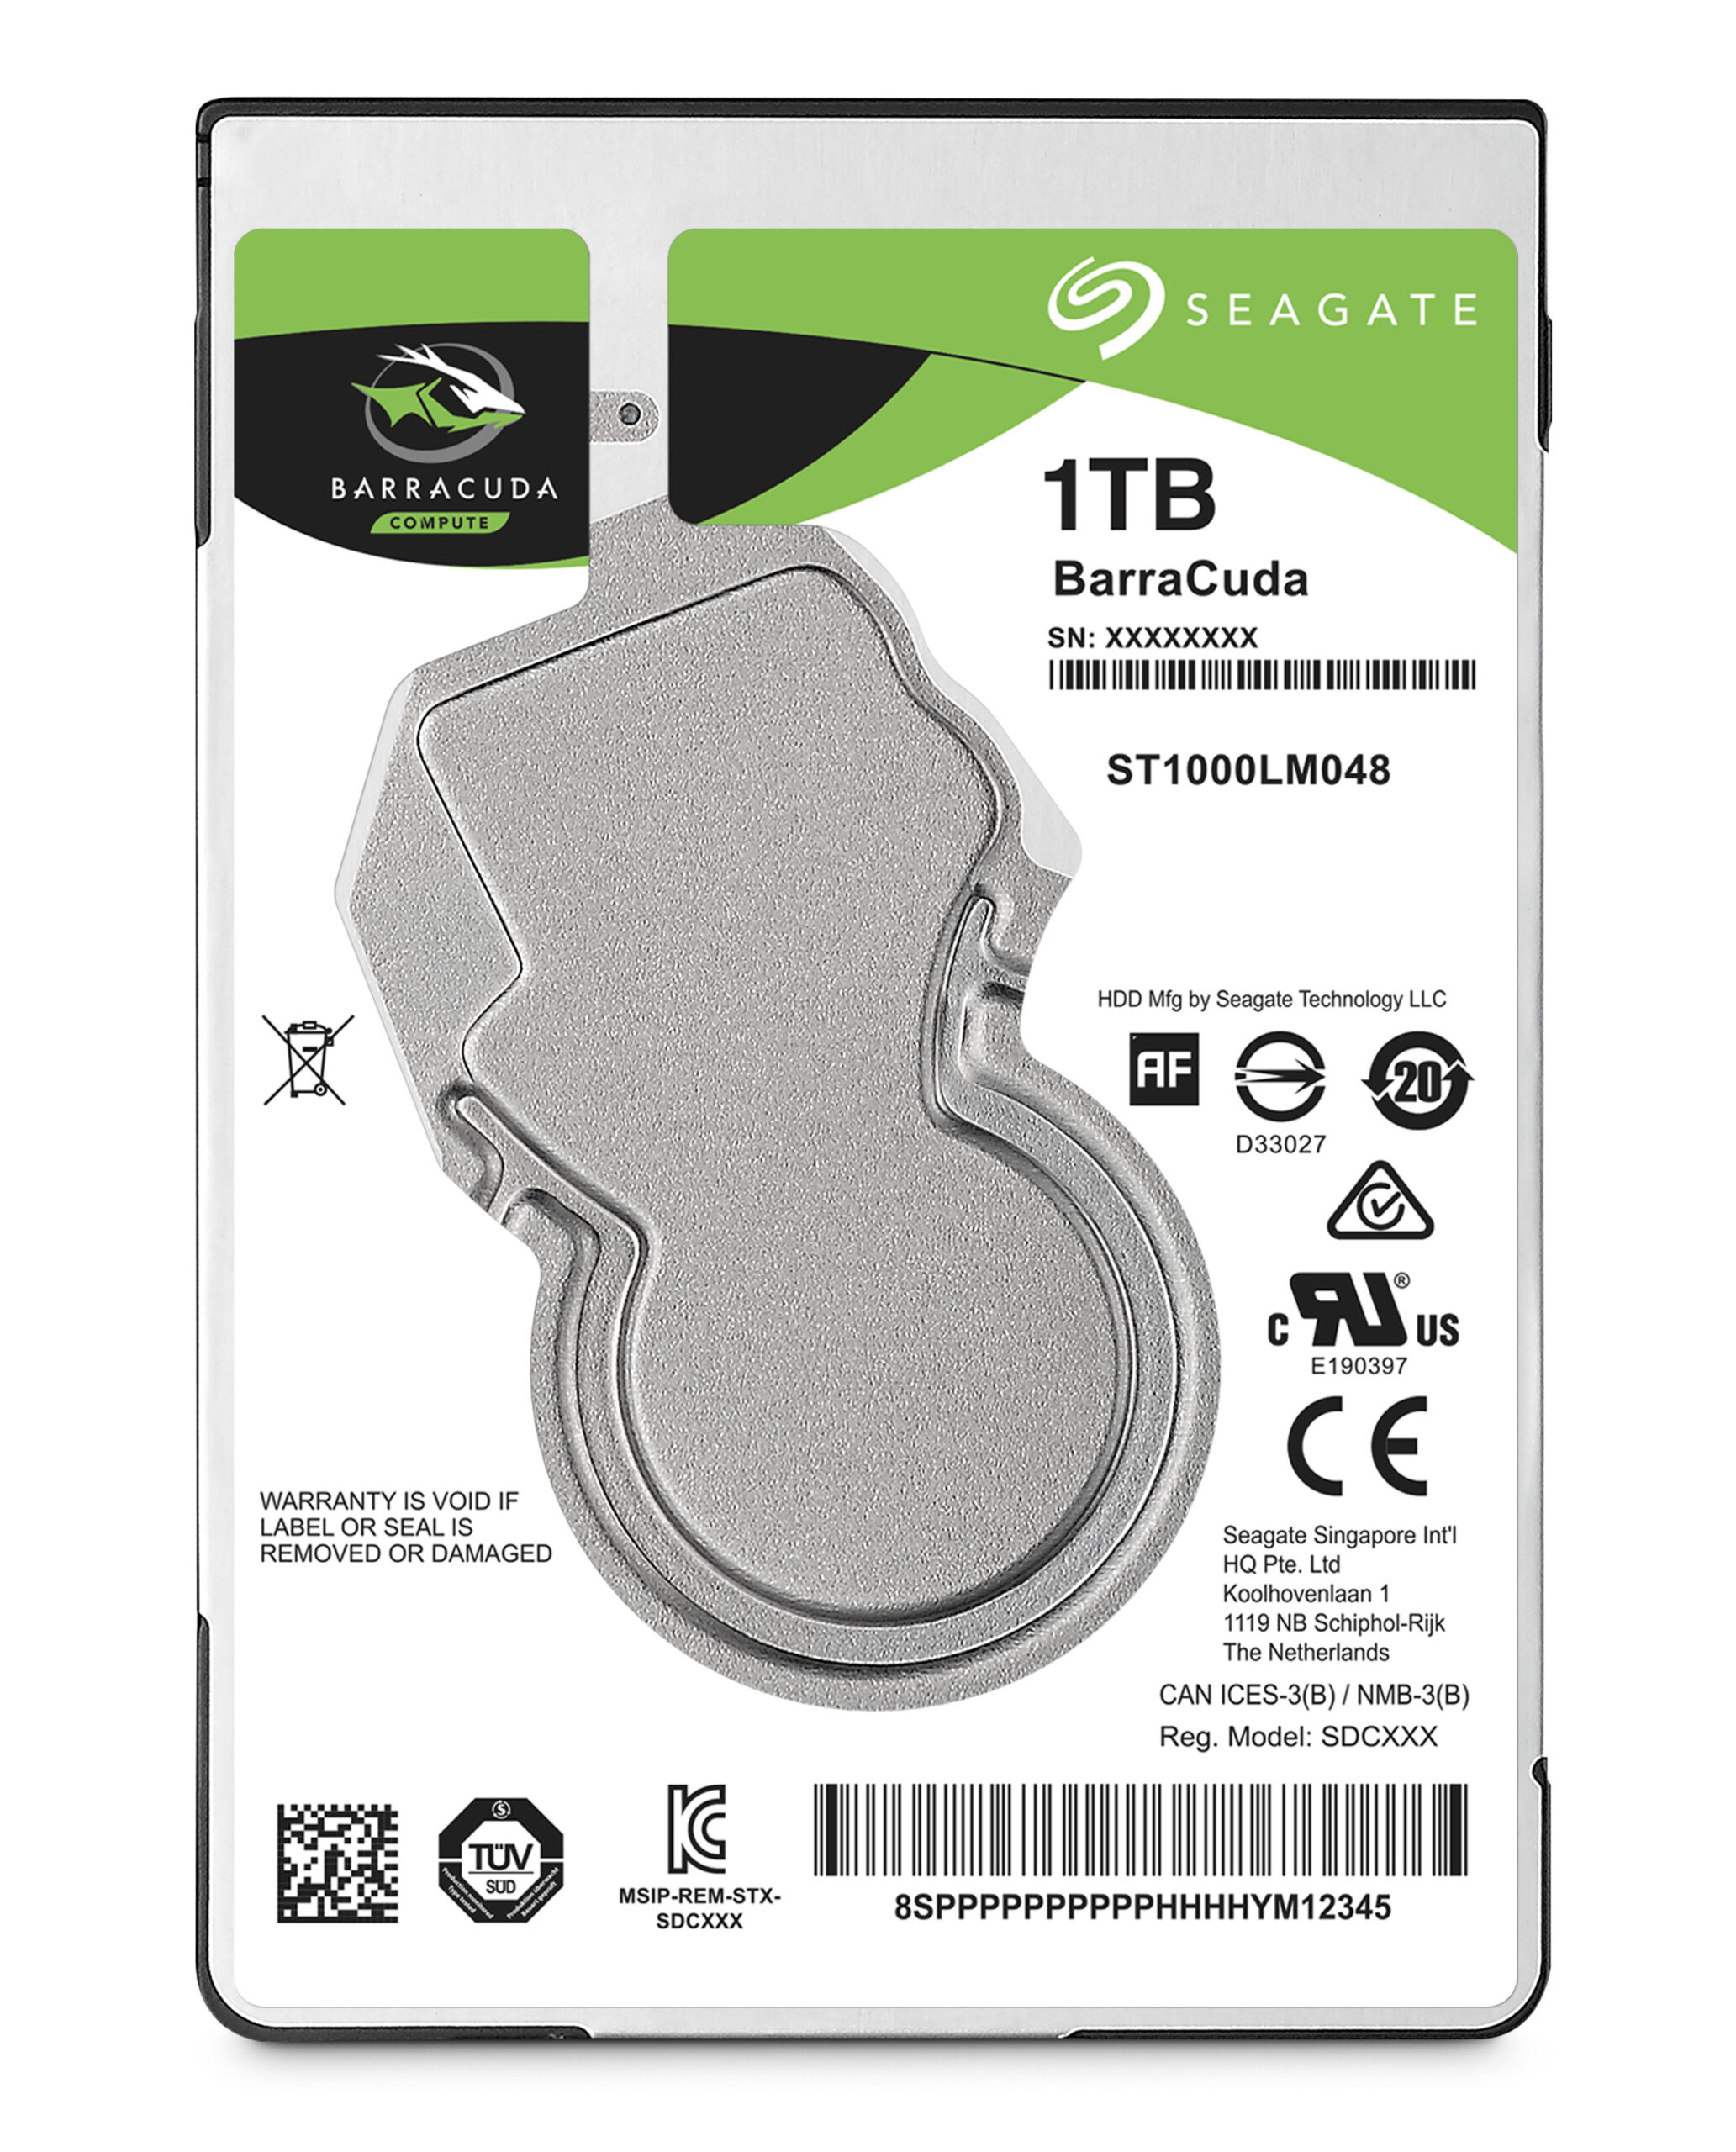 Barracuda 2 5in 1tb Sata Seagate Int Hdd Mobile St1000lm048 763649098301